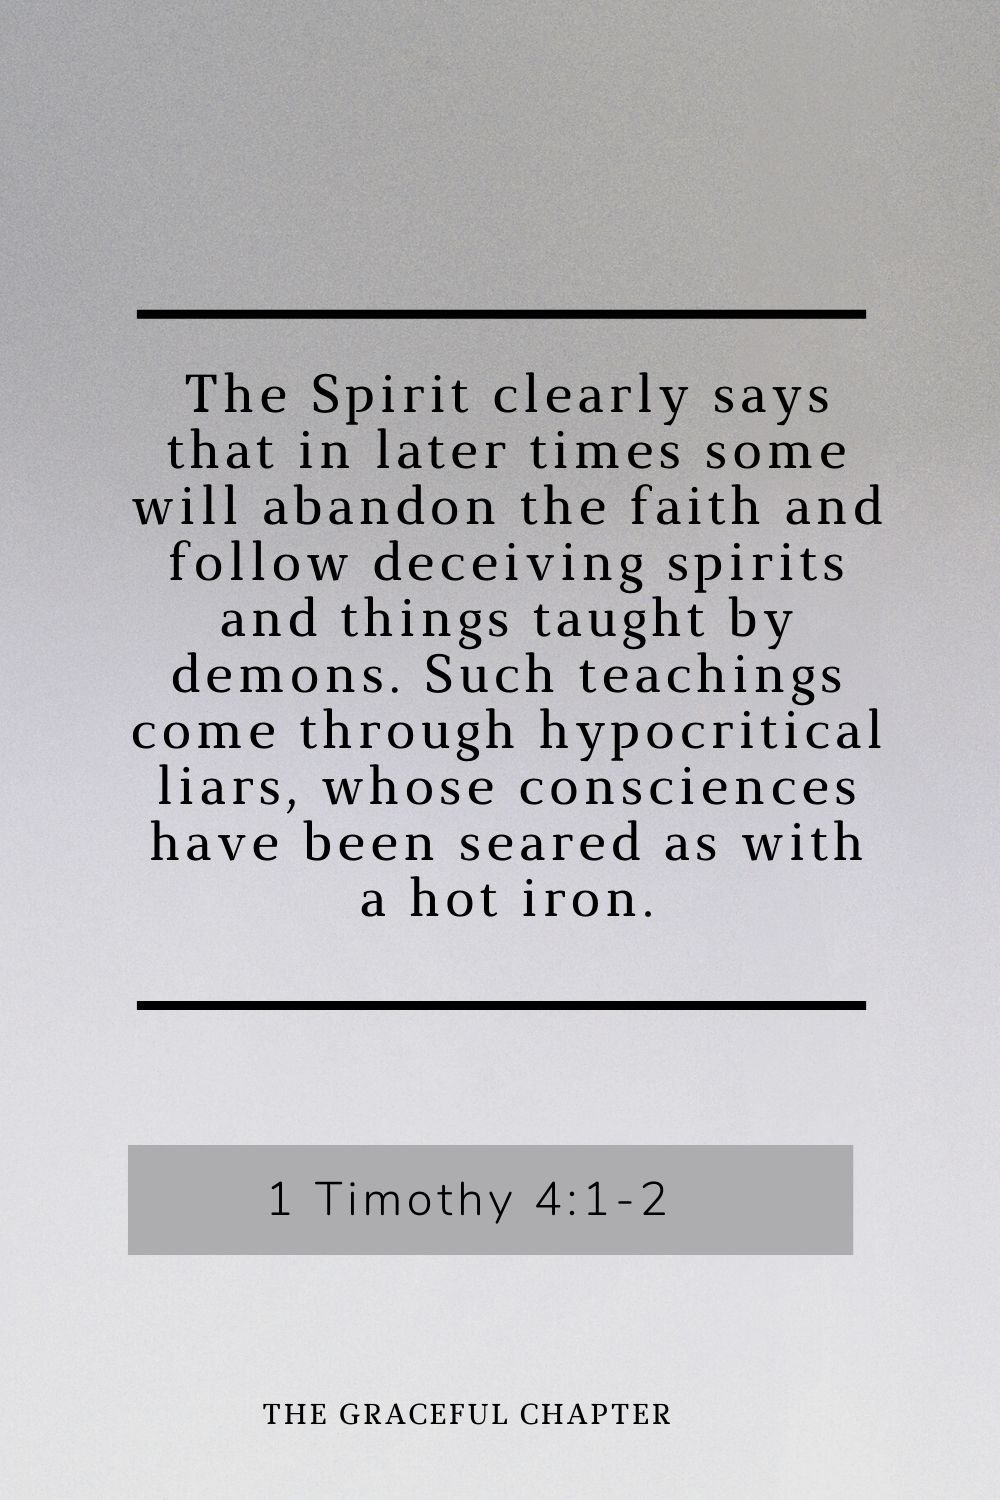 The Spirit clearly says that in later times some will abandon the faith and follow deceiving spirits and things taught by demons. Such teachings come through hypocritical liars, whose consciences have been seared as with a hot iron. 1 Timothy 4:1-2